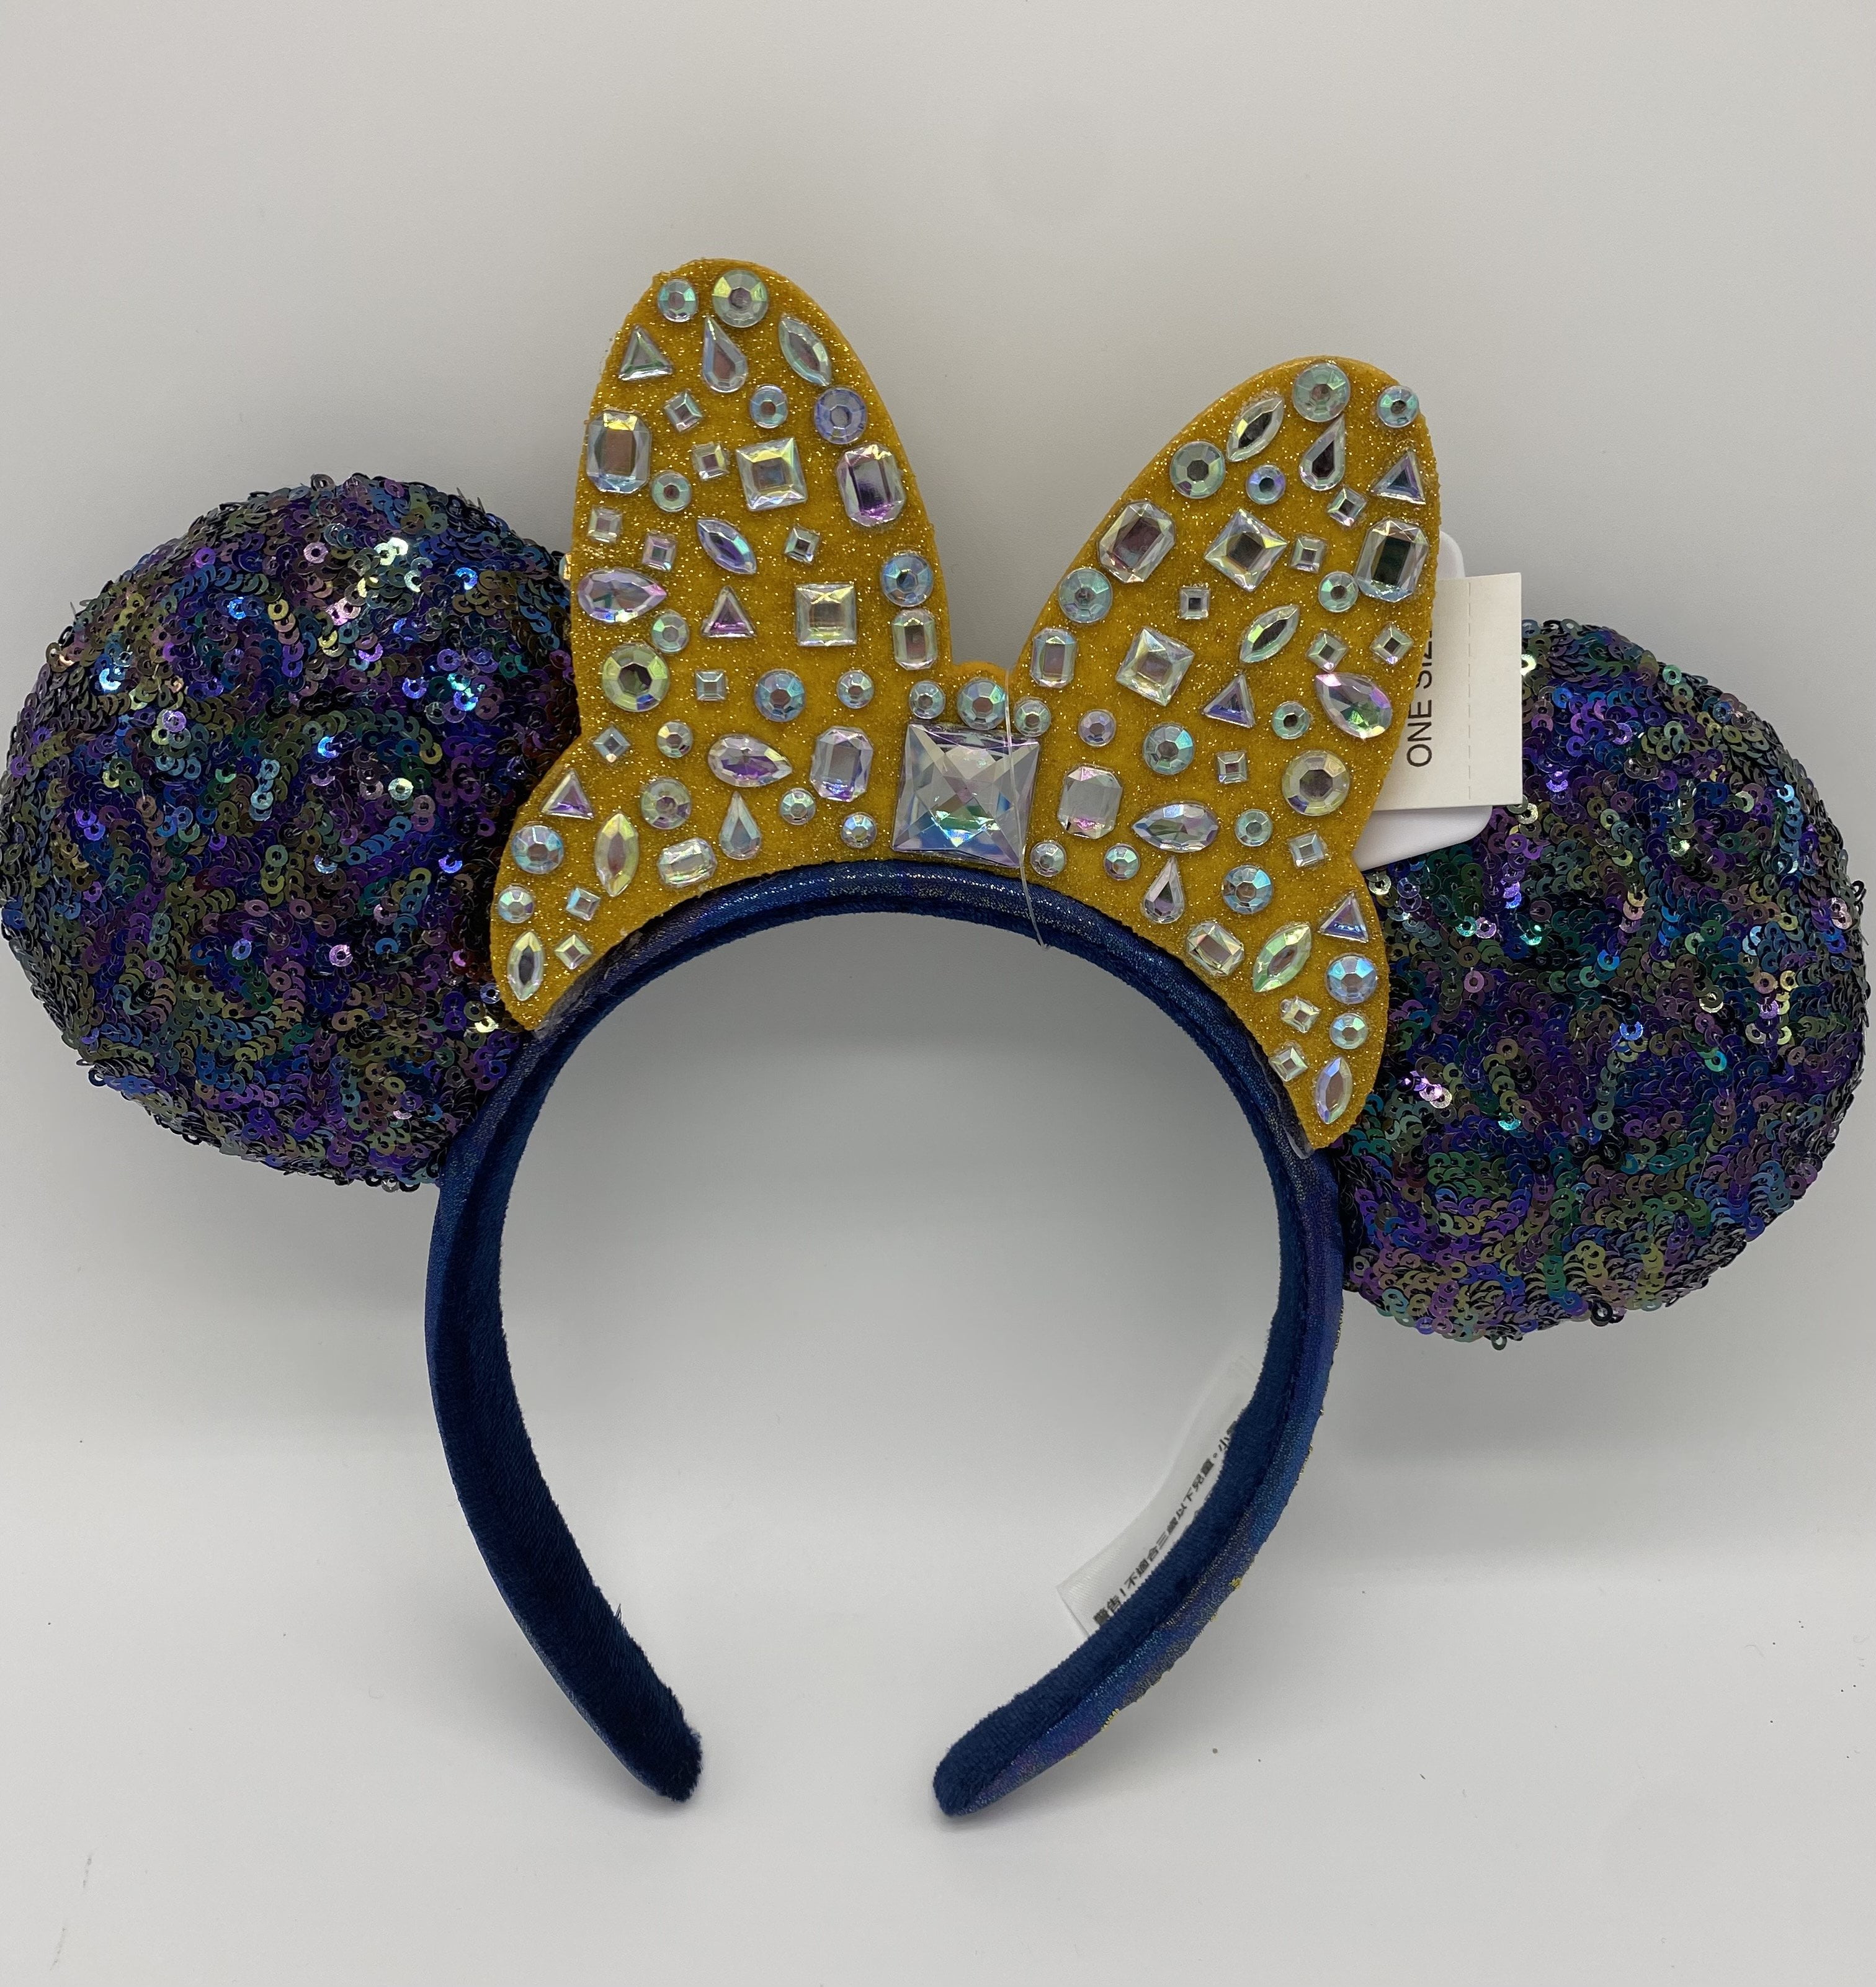 Details about   Disney Parks Minnie Mouse Multi Color Polka Dot Ear Headband New with Tags 